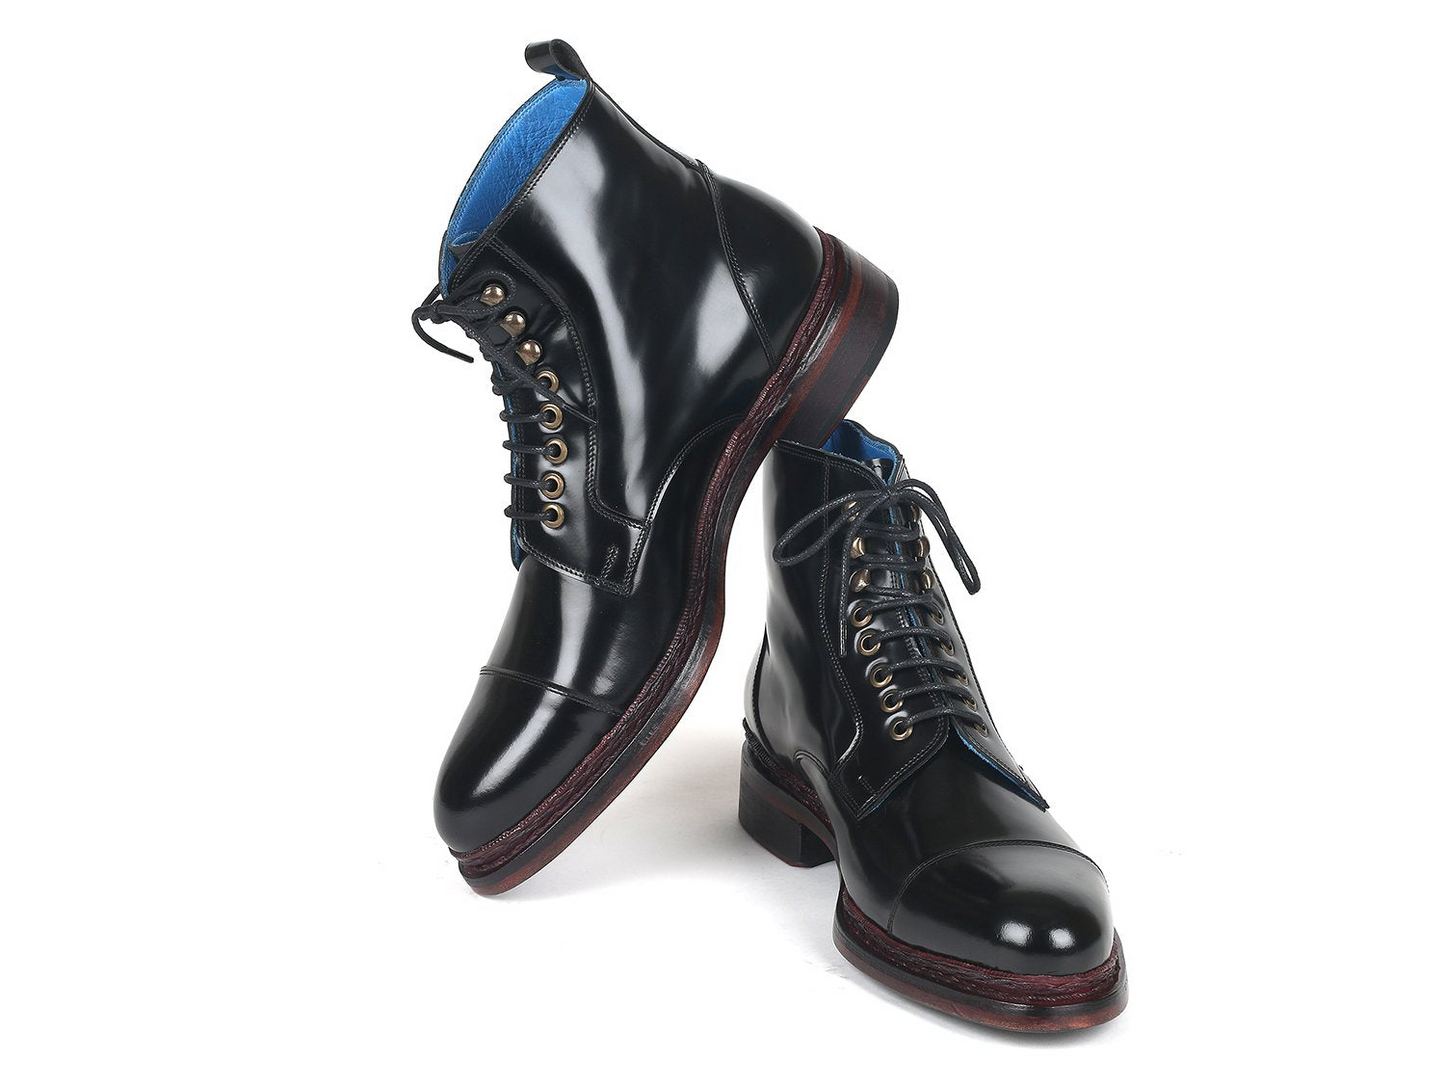 Polished Leather Boots Black, Handmade to order.